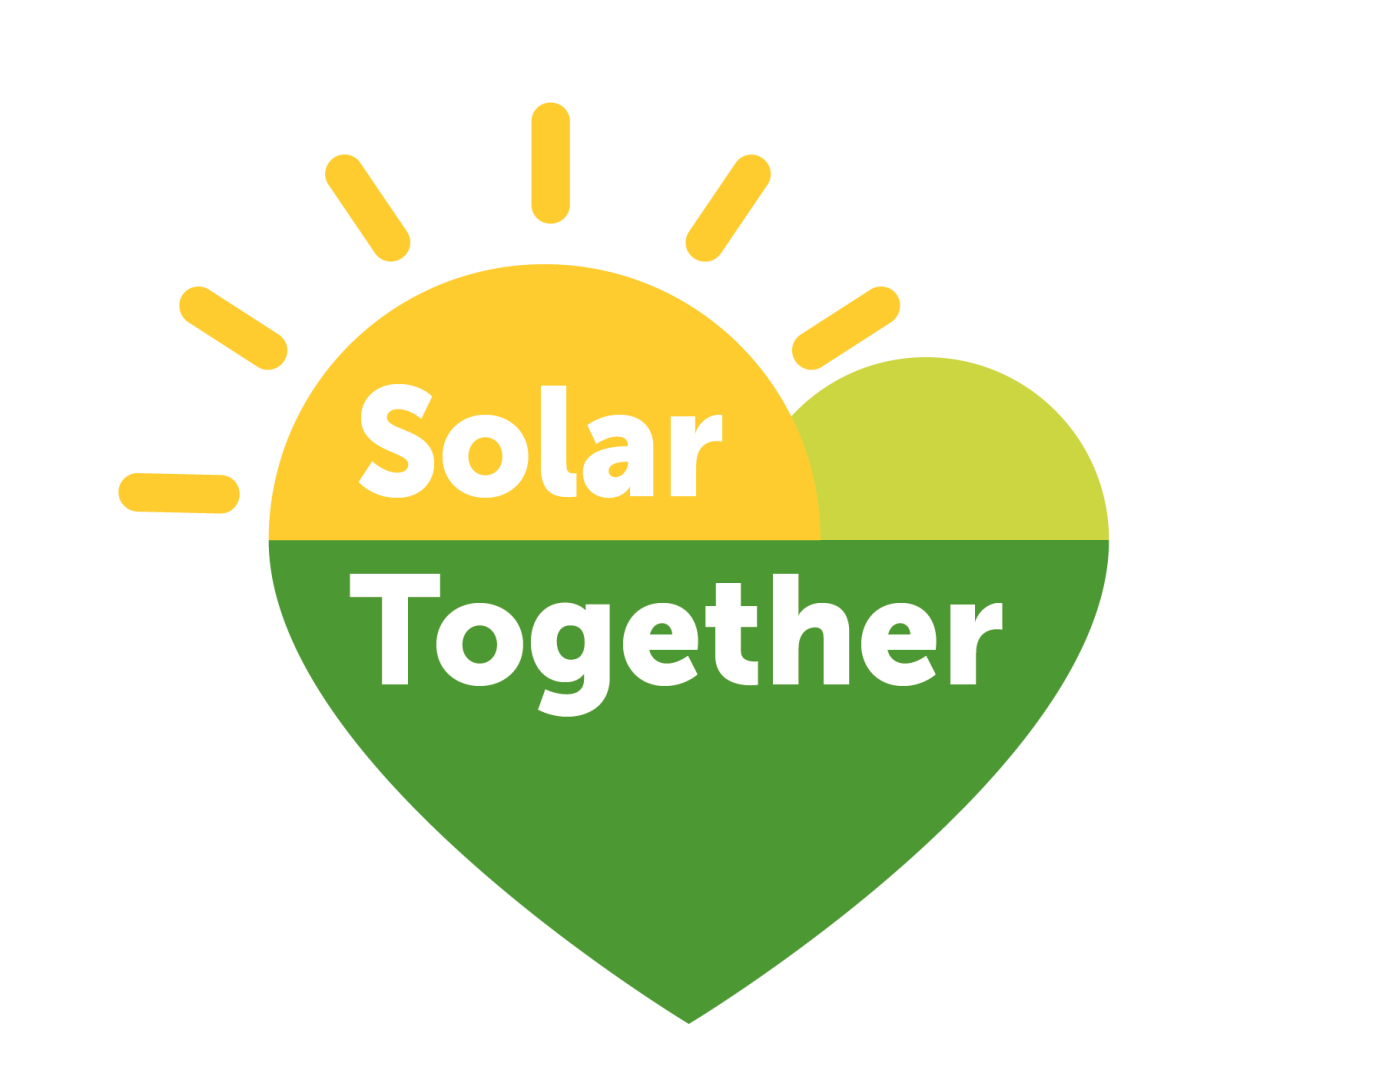 Solar Together logo, which has the words "Solar Together" on a yellow and green heart